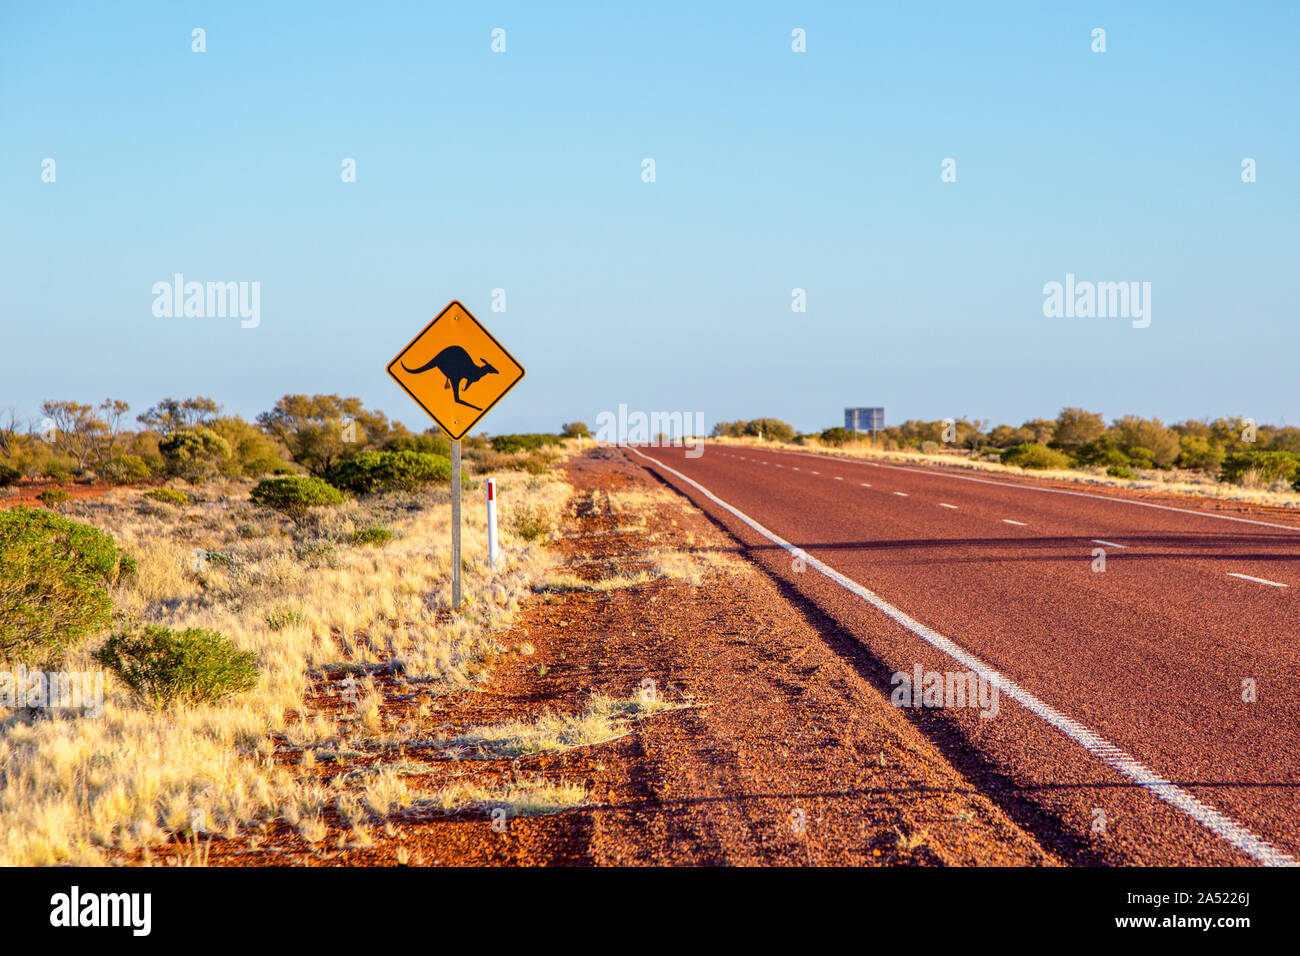 Kangaroo road sign on remote outback road Stuart Highway connecting Port Augusta, South Australia with Alice Springs, Northern Territory, Australia Stock Photo